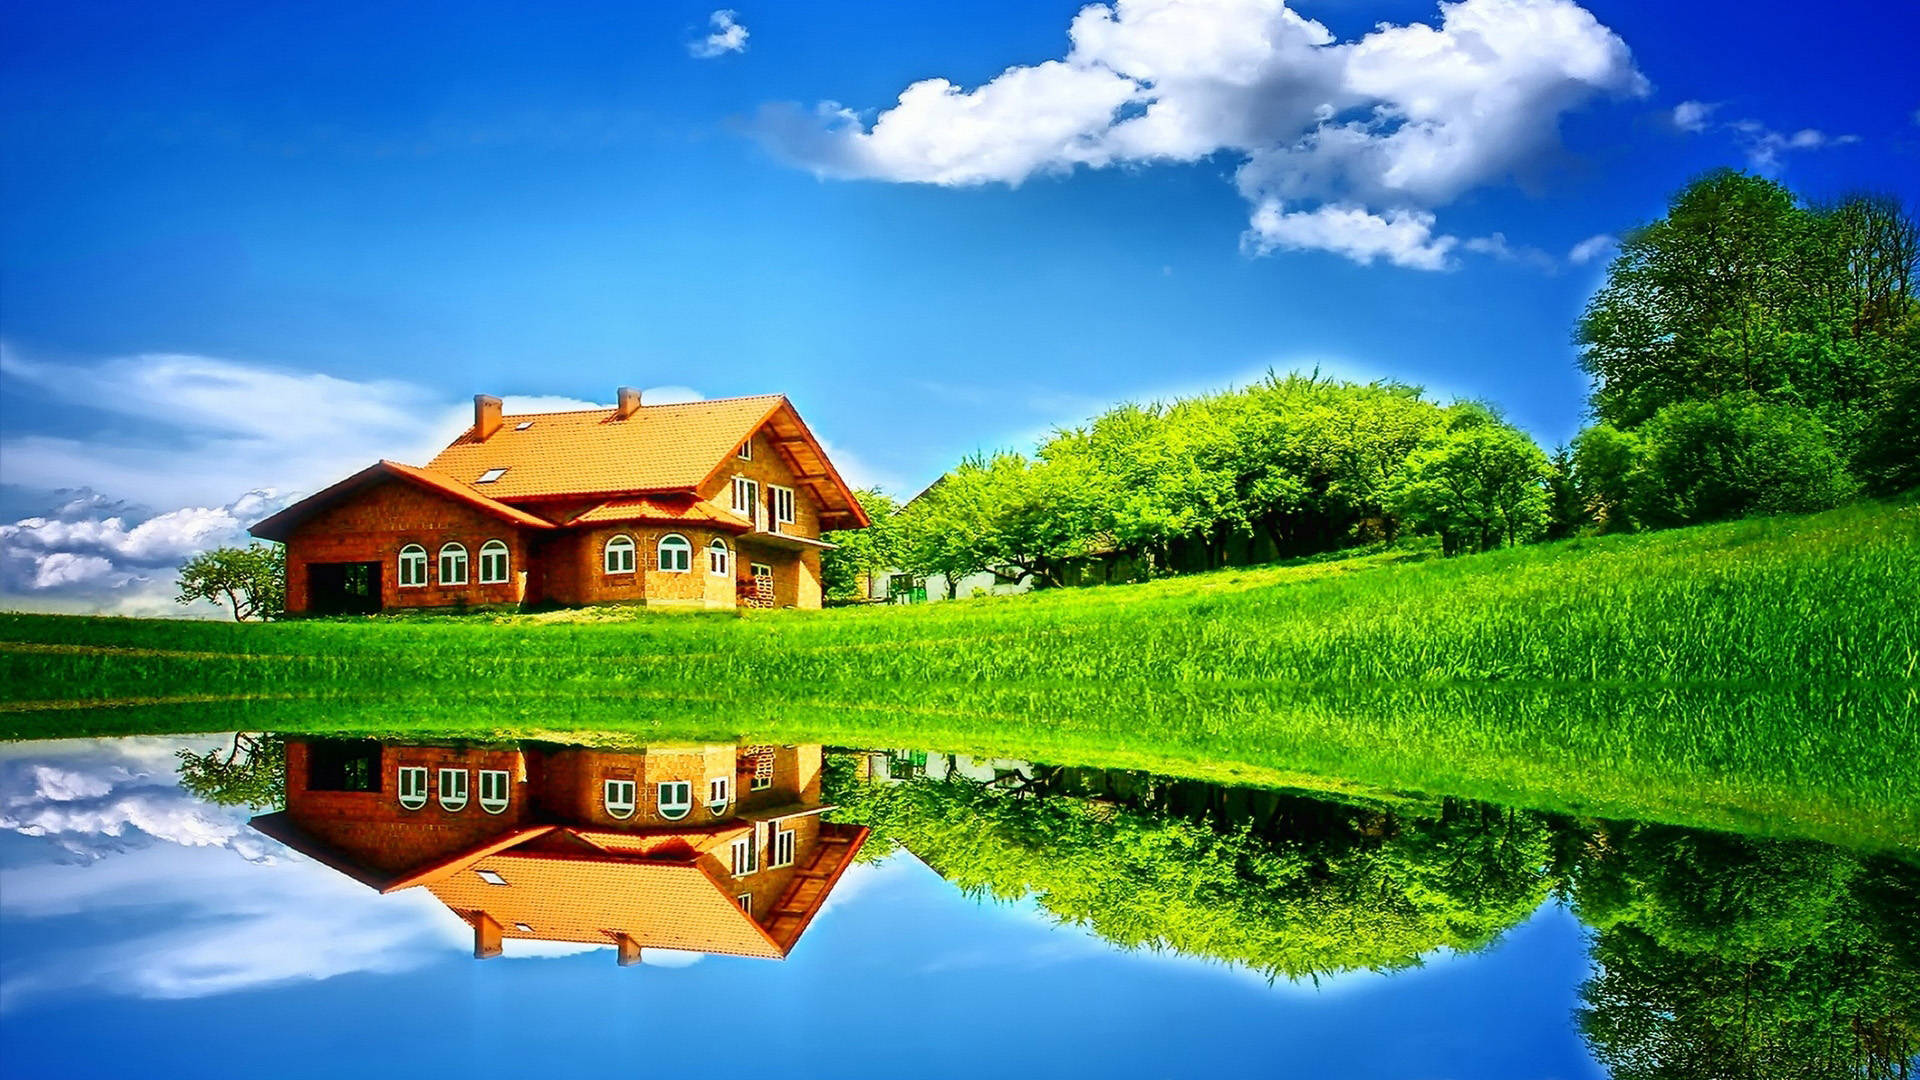 Yellow House And Greenery Best Hd Wallpaper